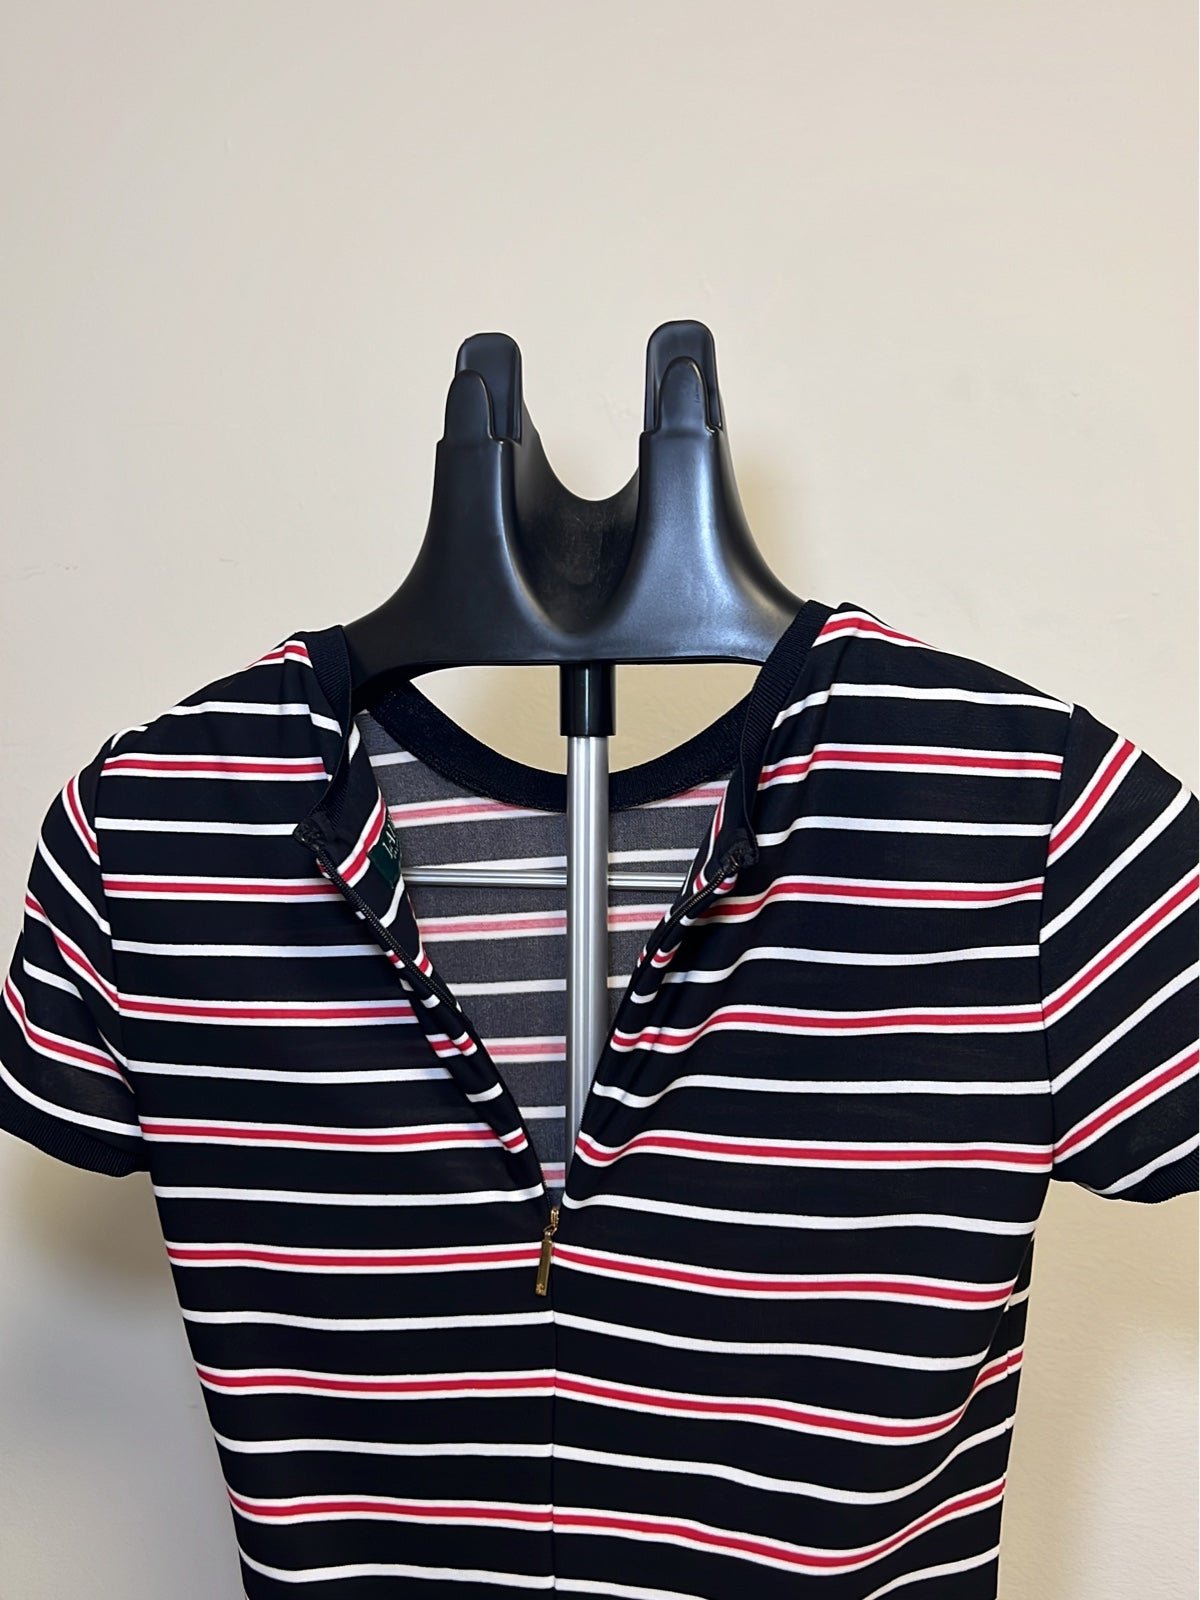 large discount Ralph Lauren black polyester white and red striped fitted top in women’s XS hFIdFxCAK Wholesale